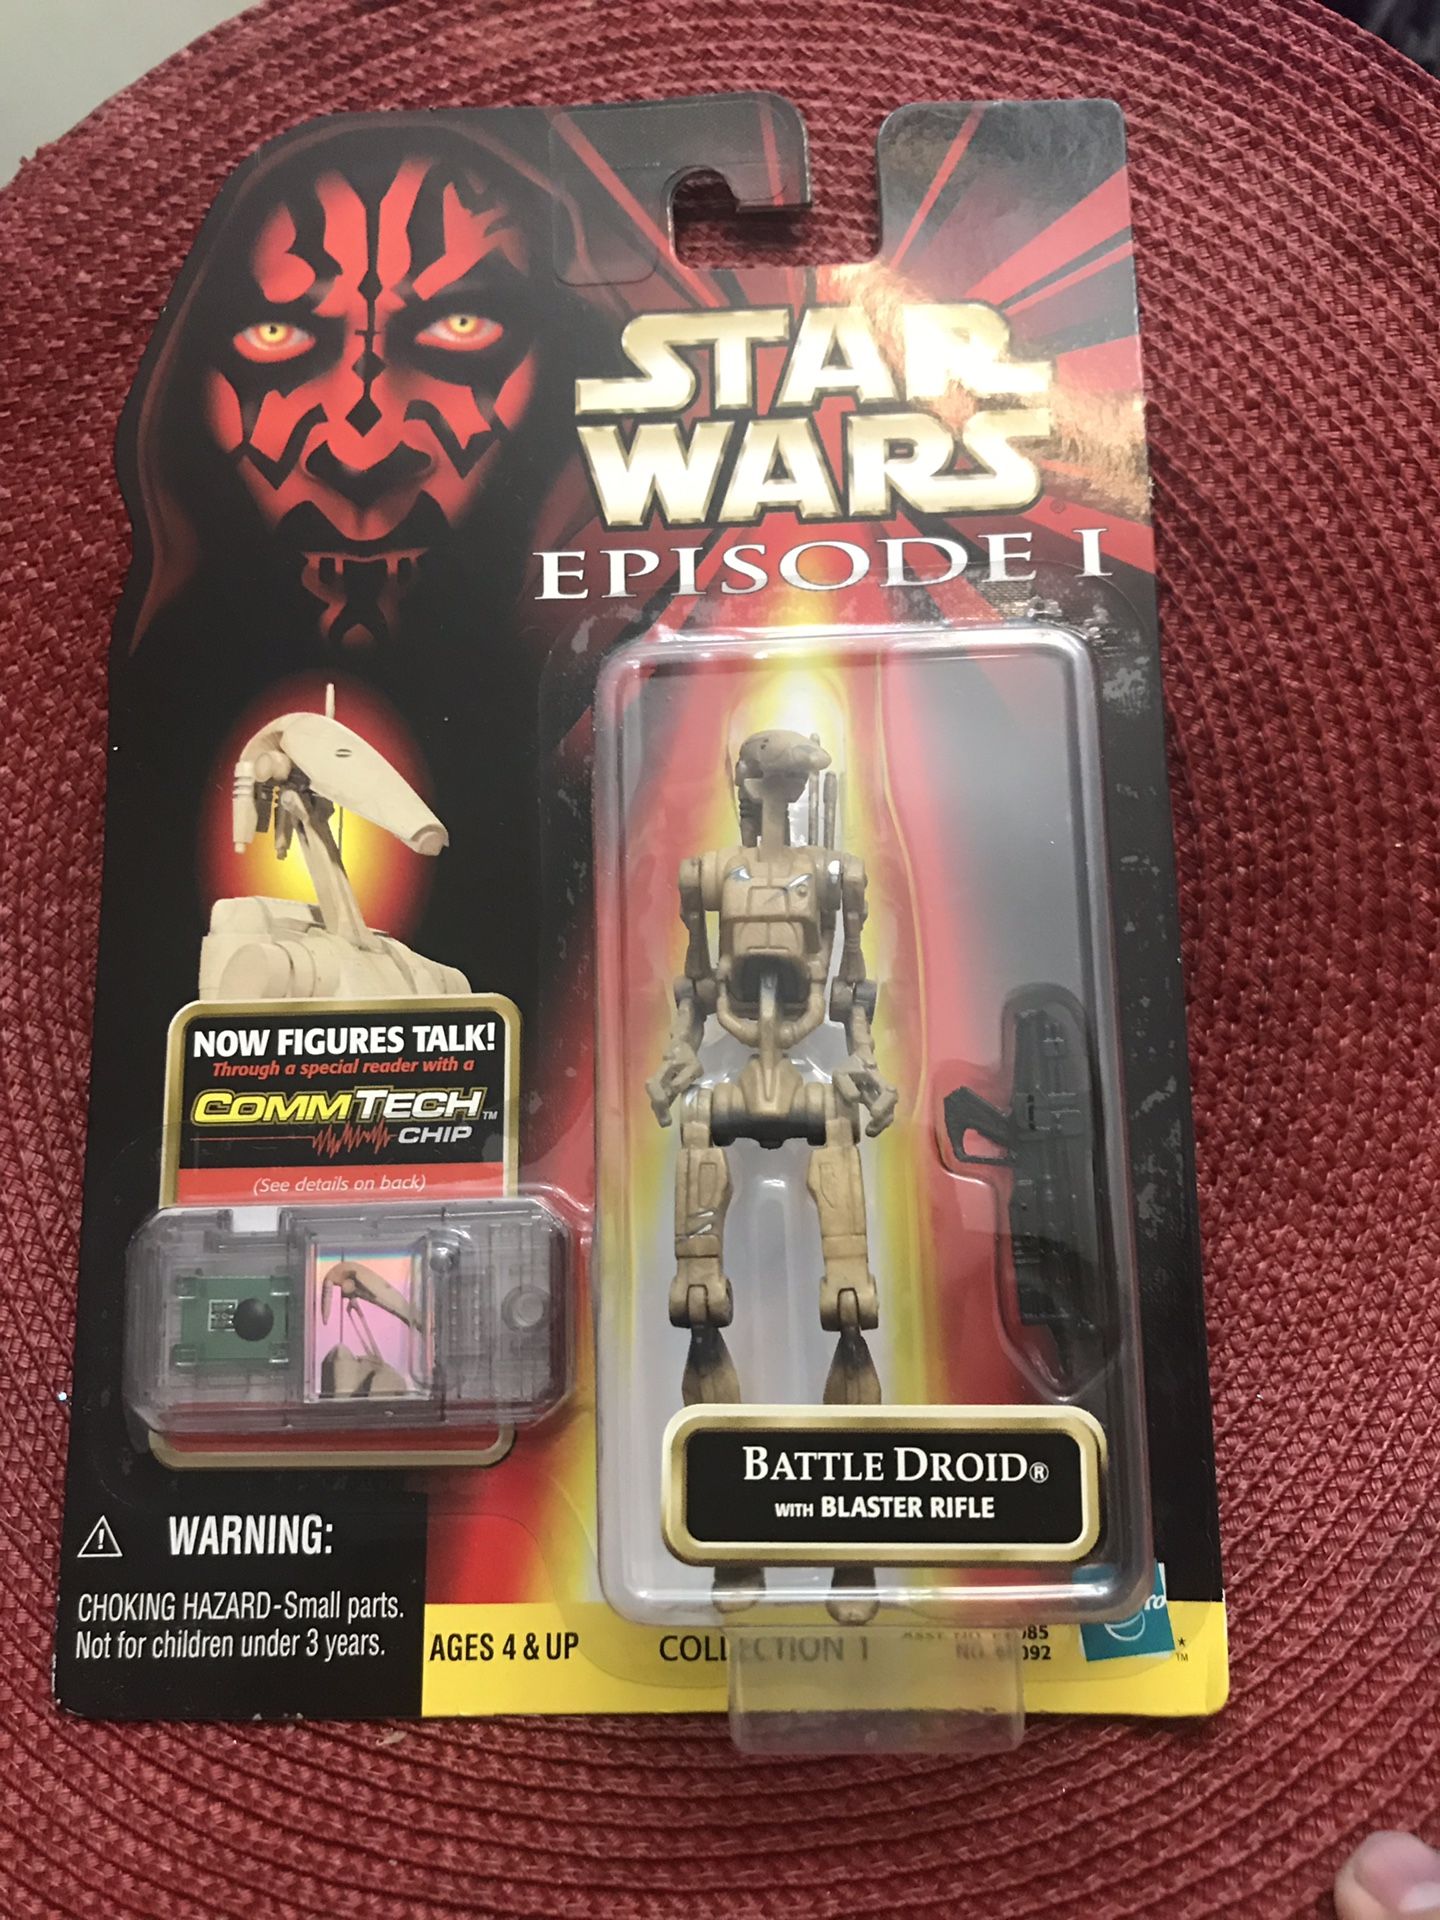 Star Wars Episode 1 Battle Droid with Blaster Rifle CommTech Chip